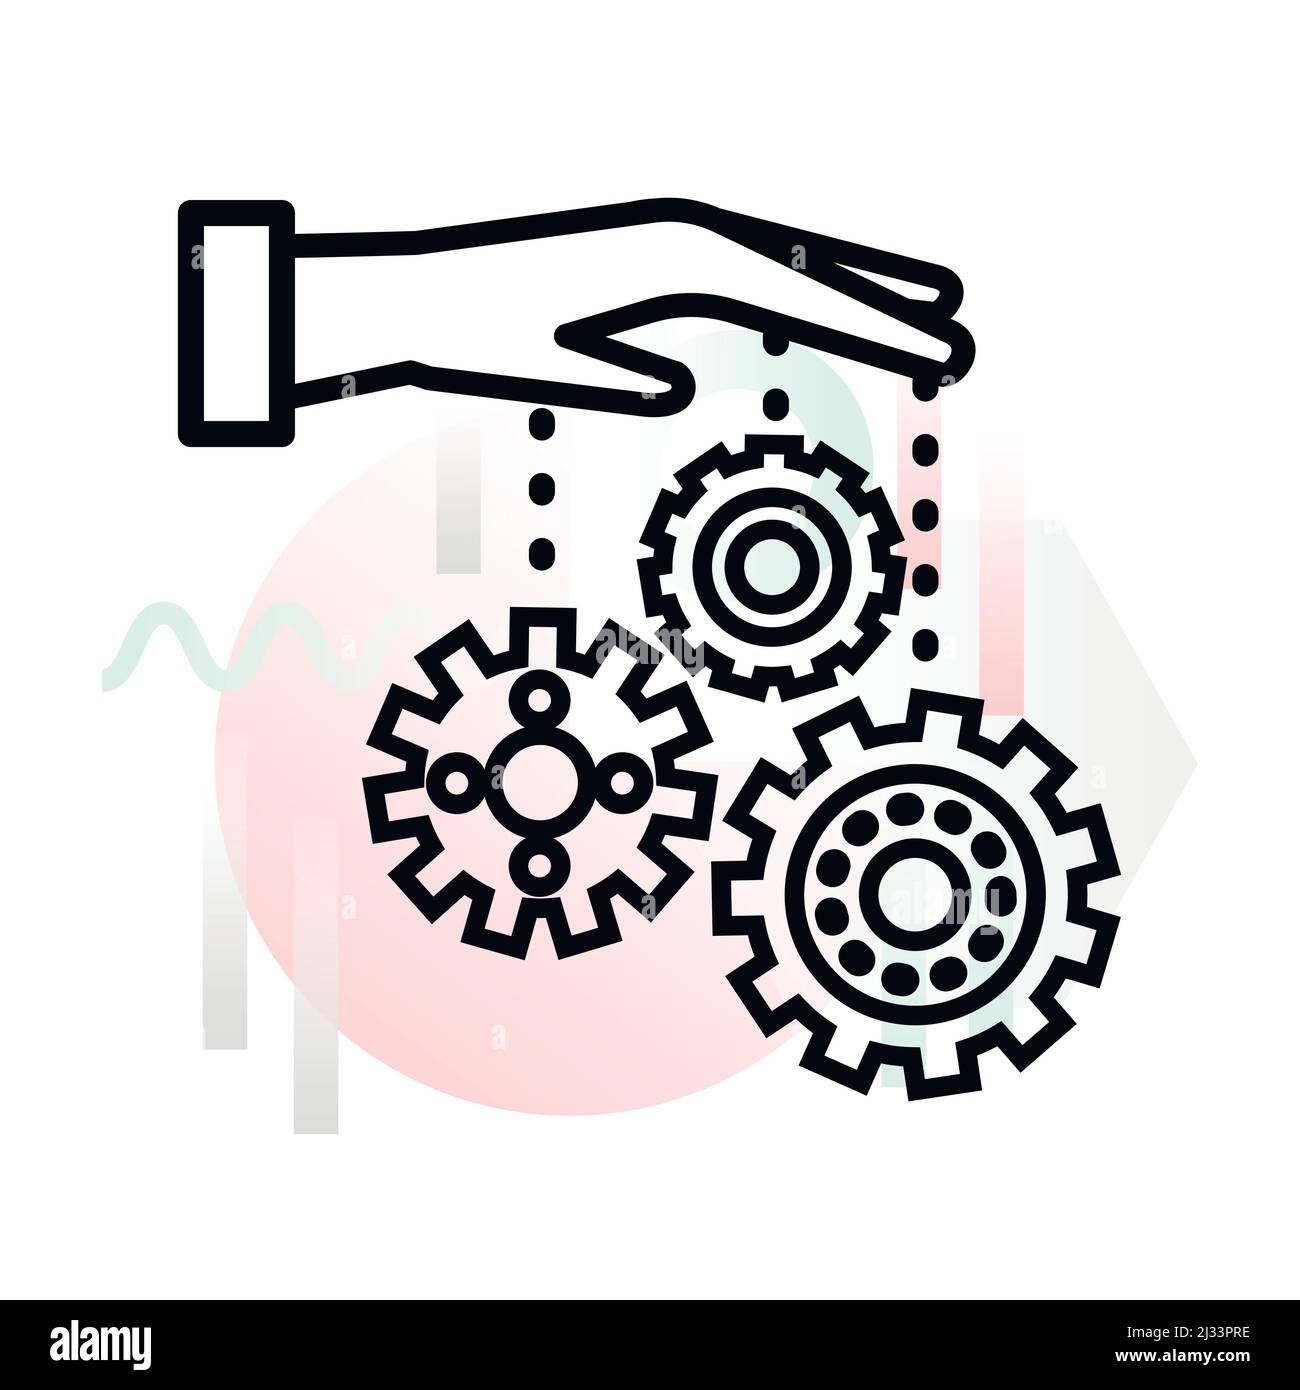 Concept icon of process management with abstract background, modern thin line design vector illustration for graphic and web design Stock Vector